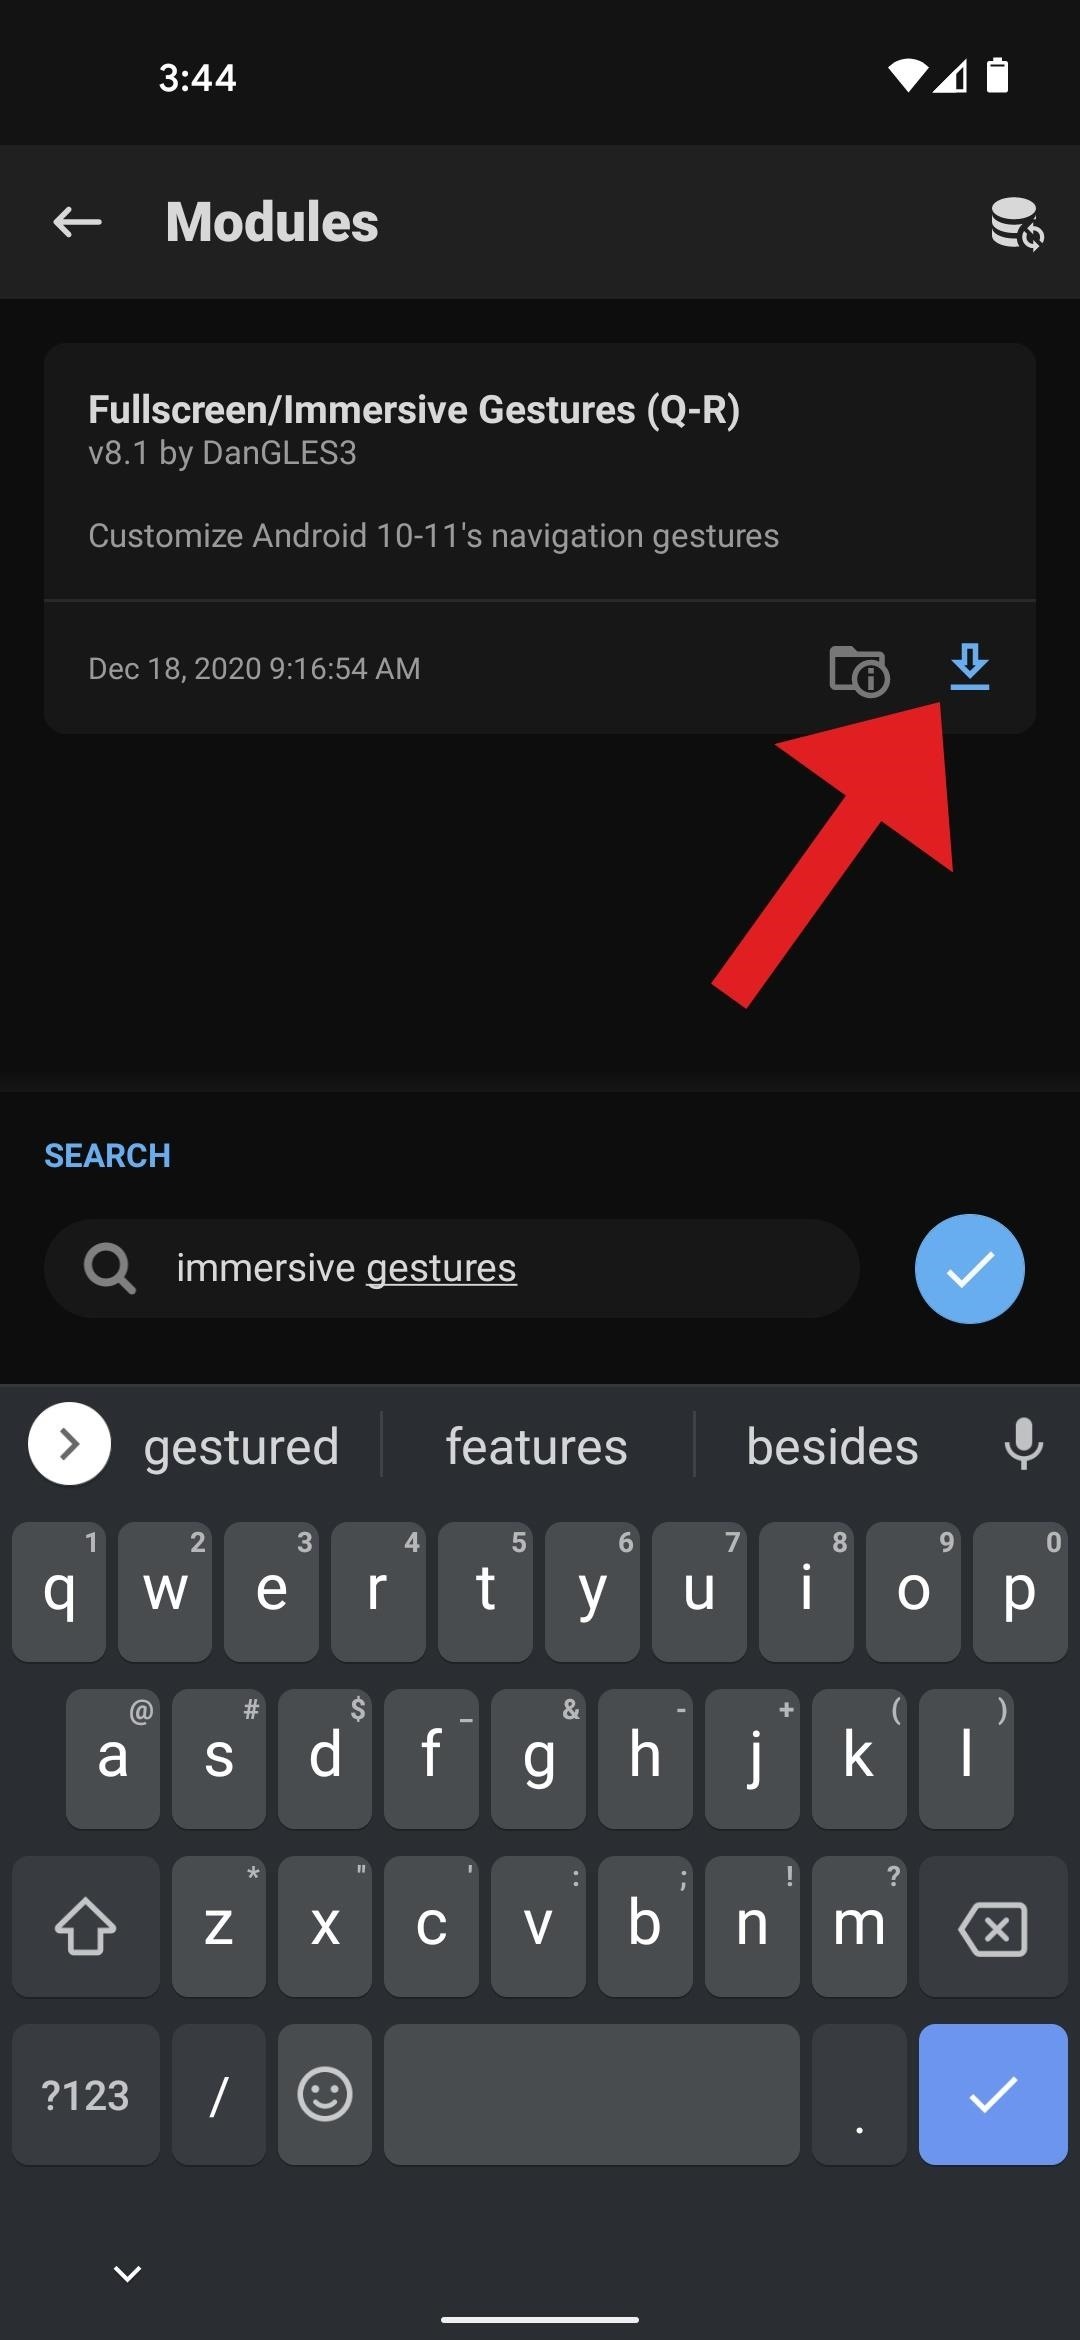 How to Hide the Gesture Pill in Android's Navigation Bar